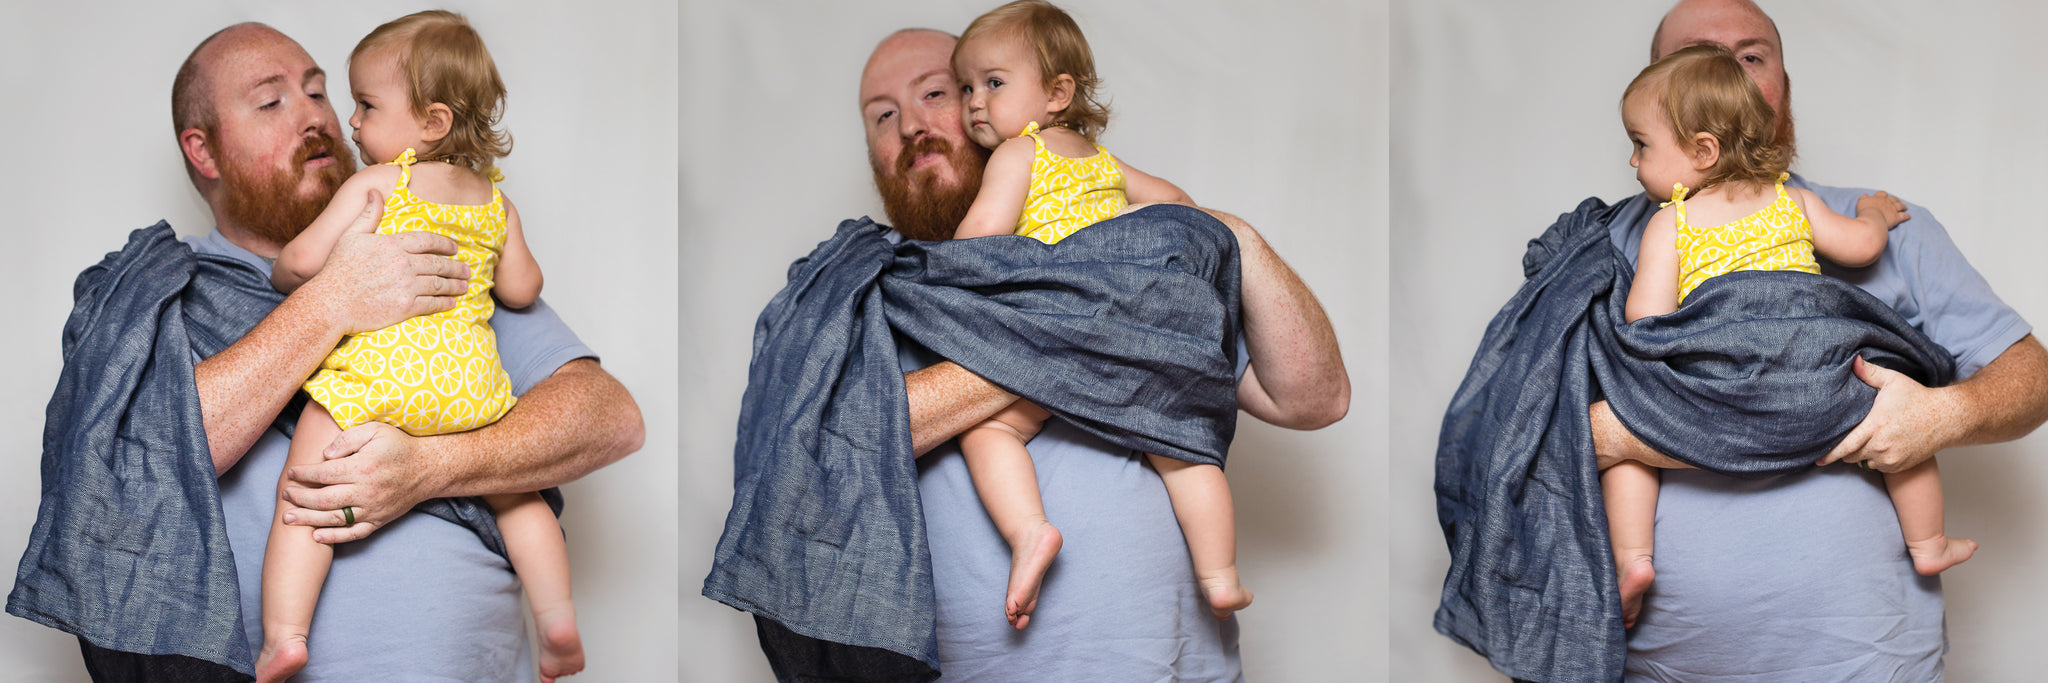 How to use a Studio Tekhni ring sling baby carrier.  Easy, stylish, modern linen fabric carriers from newborn and beyond.  A baby and registry essential item.